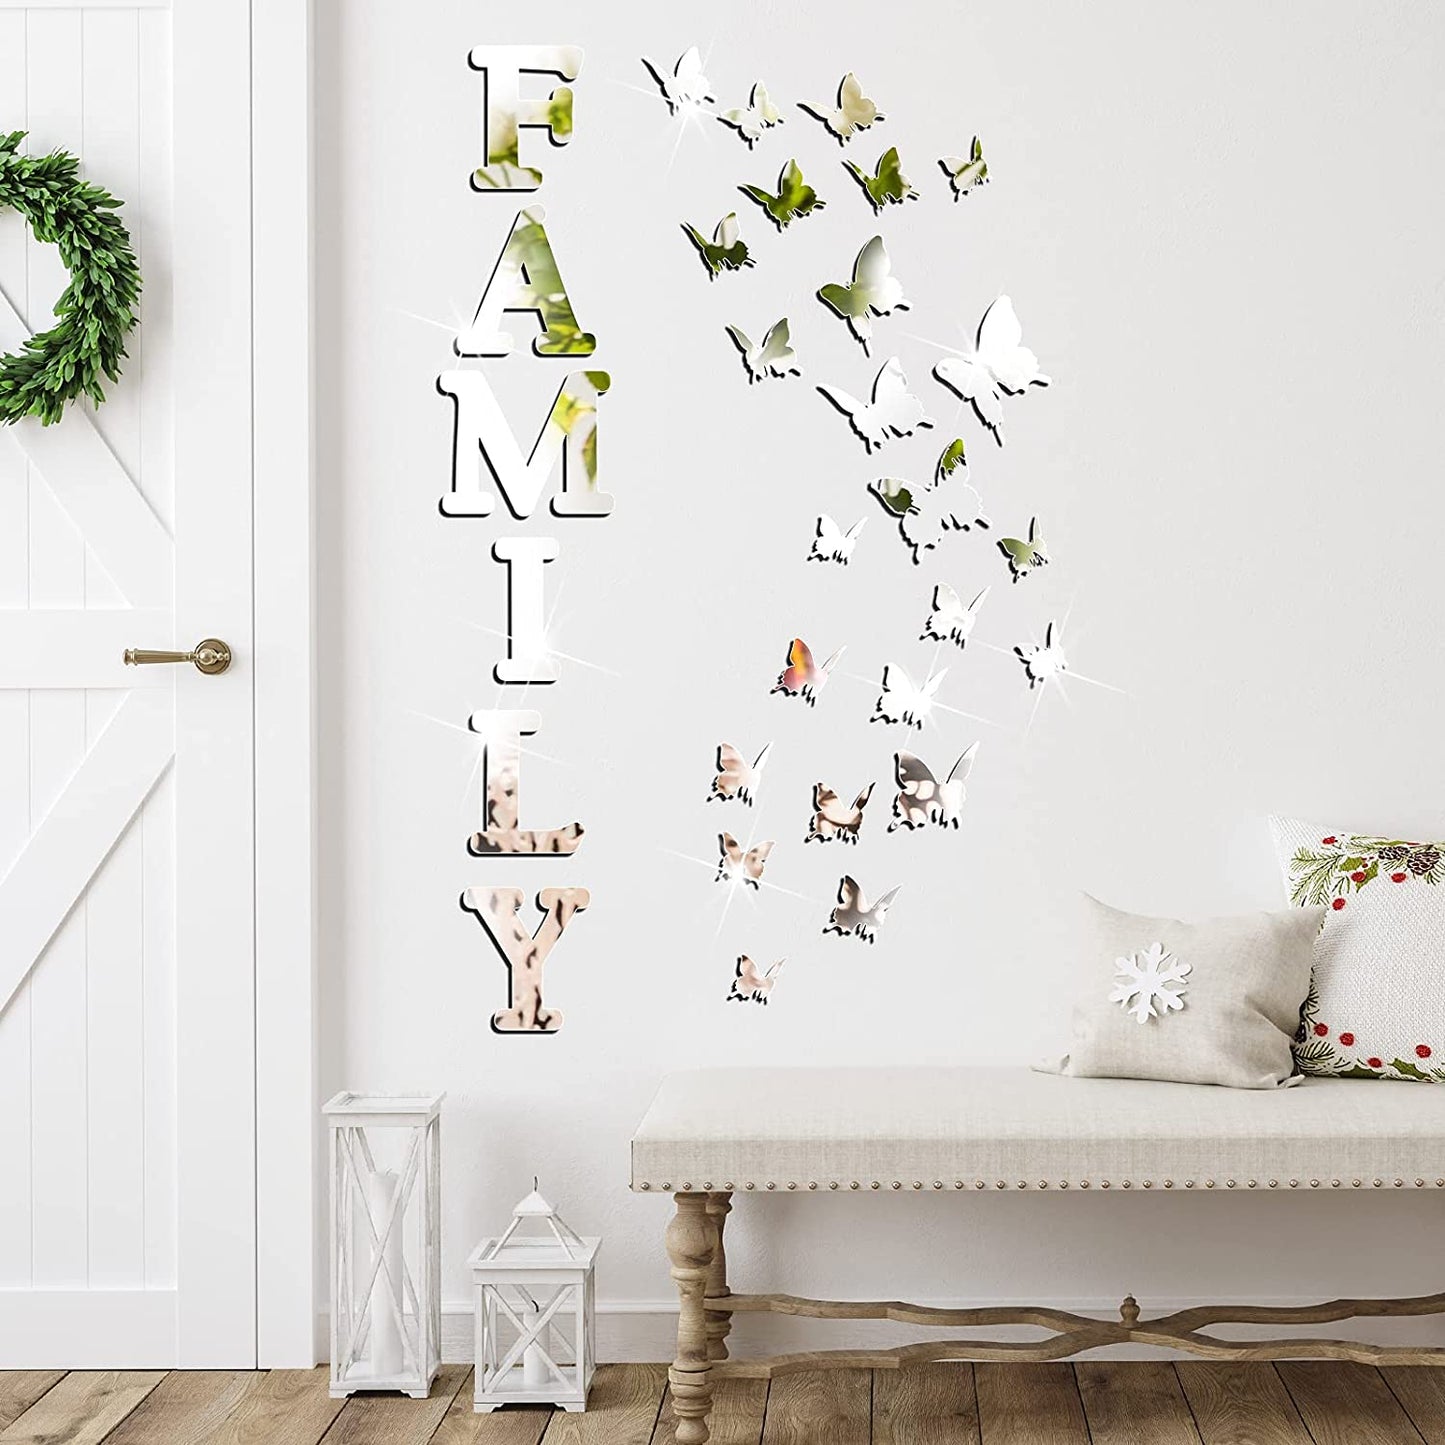 3D Family Home Sign Letters Living Room Decor Family Rustic Farmhouse Wall Decor Acrylic Mirror Decorative Butterfly Mirror Wall Sticker Decals for Living Room Bedroom Kitchen (Silver)